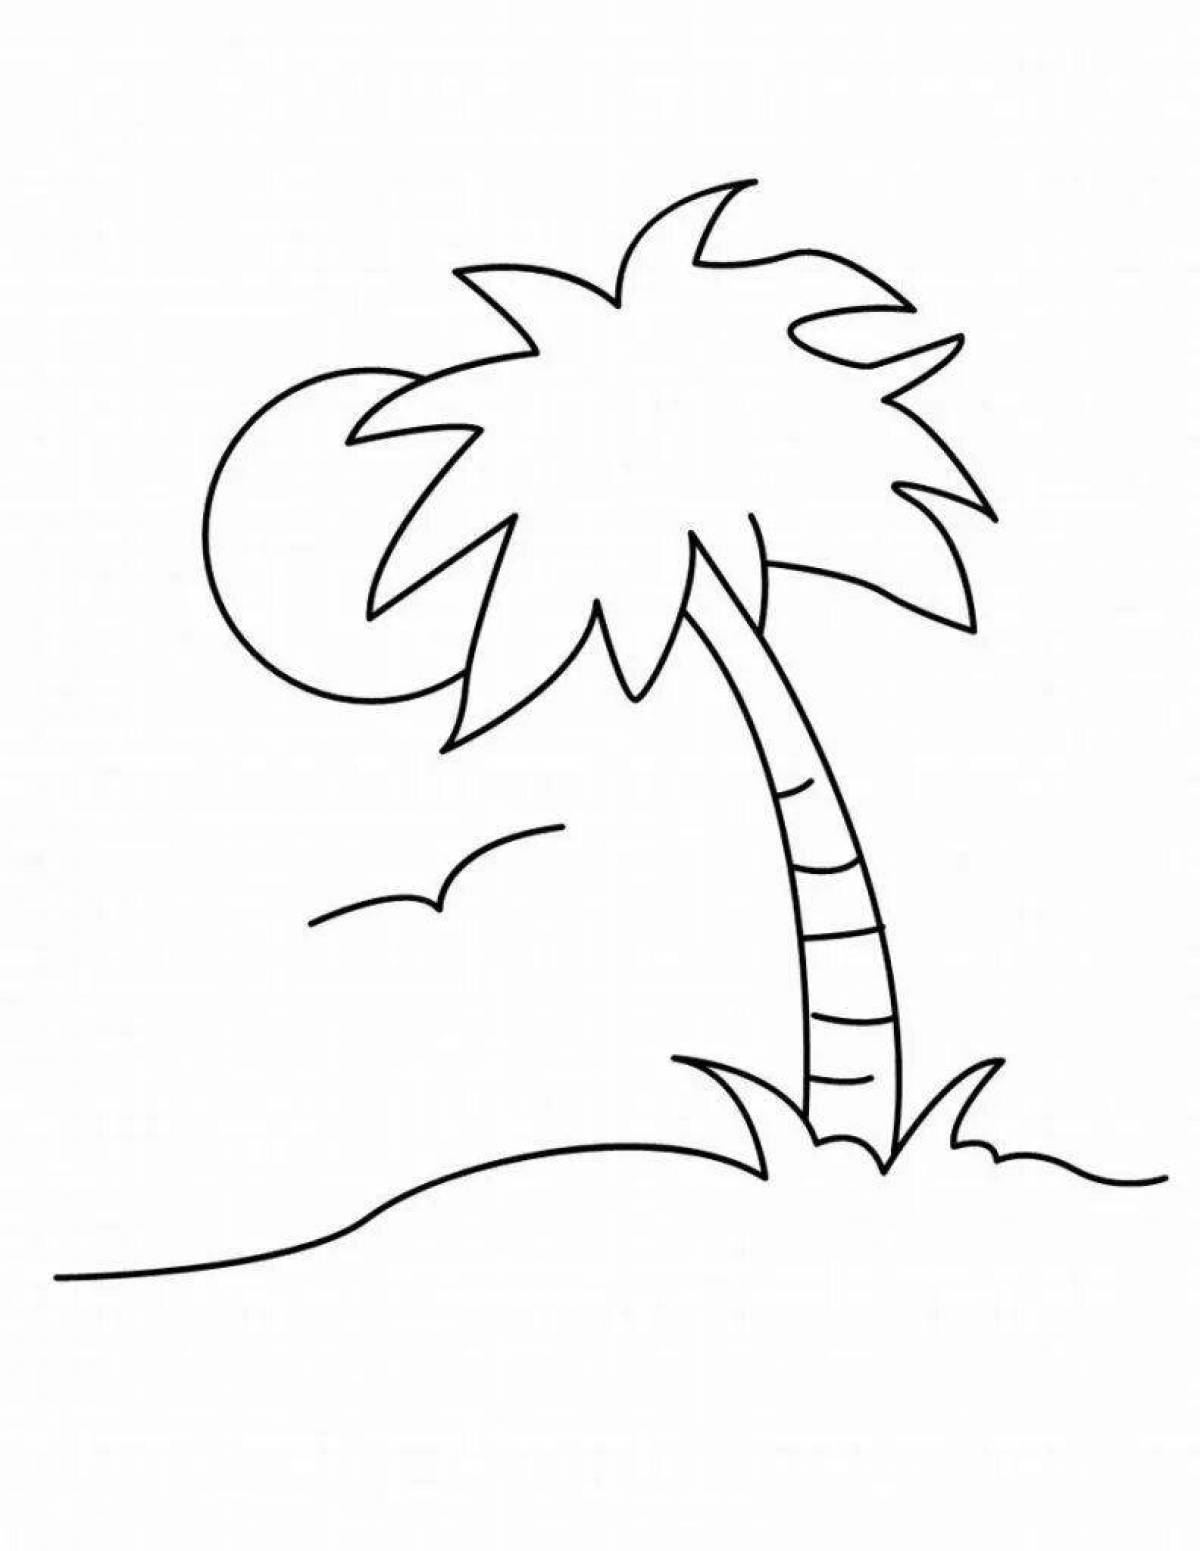 Lovely palm tree coloring page for kids